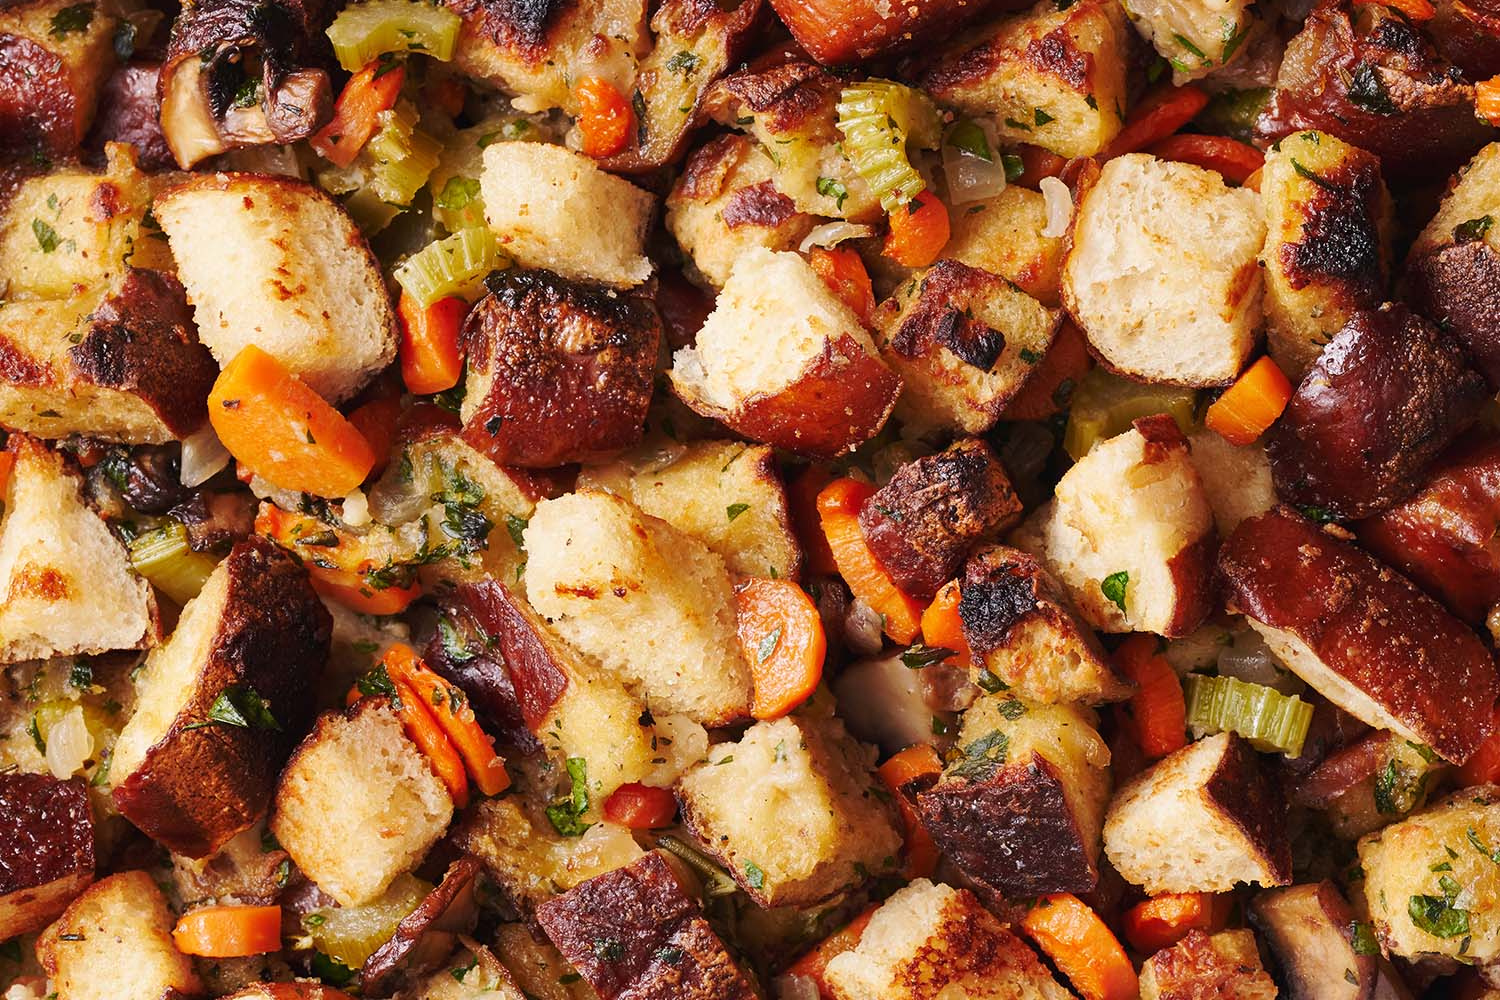 close-up photo of the pretzel stuffing after being baked, showing the cubed pretzels and cooked veggies and herbs.